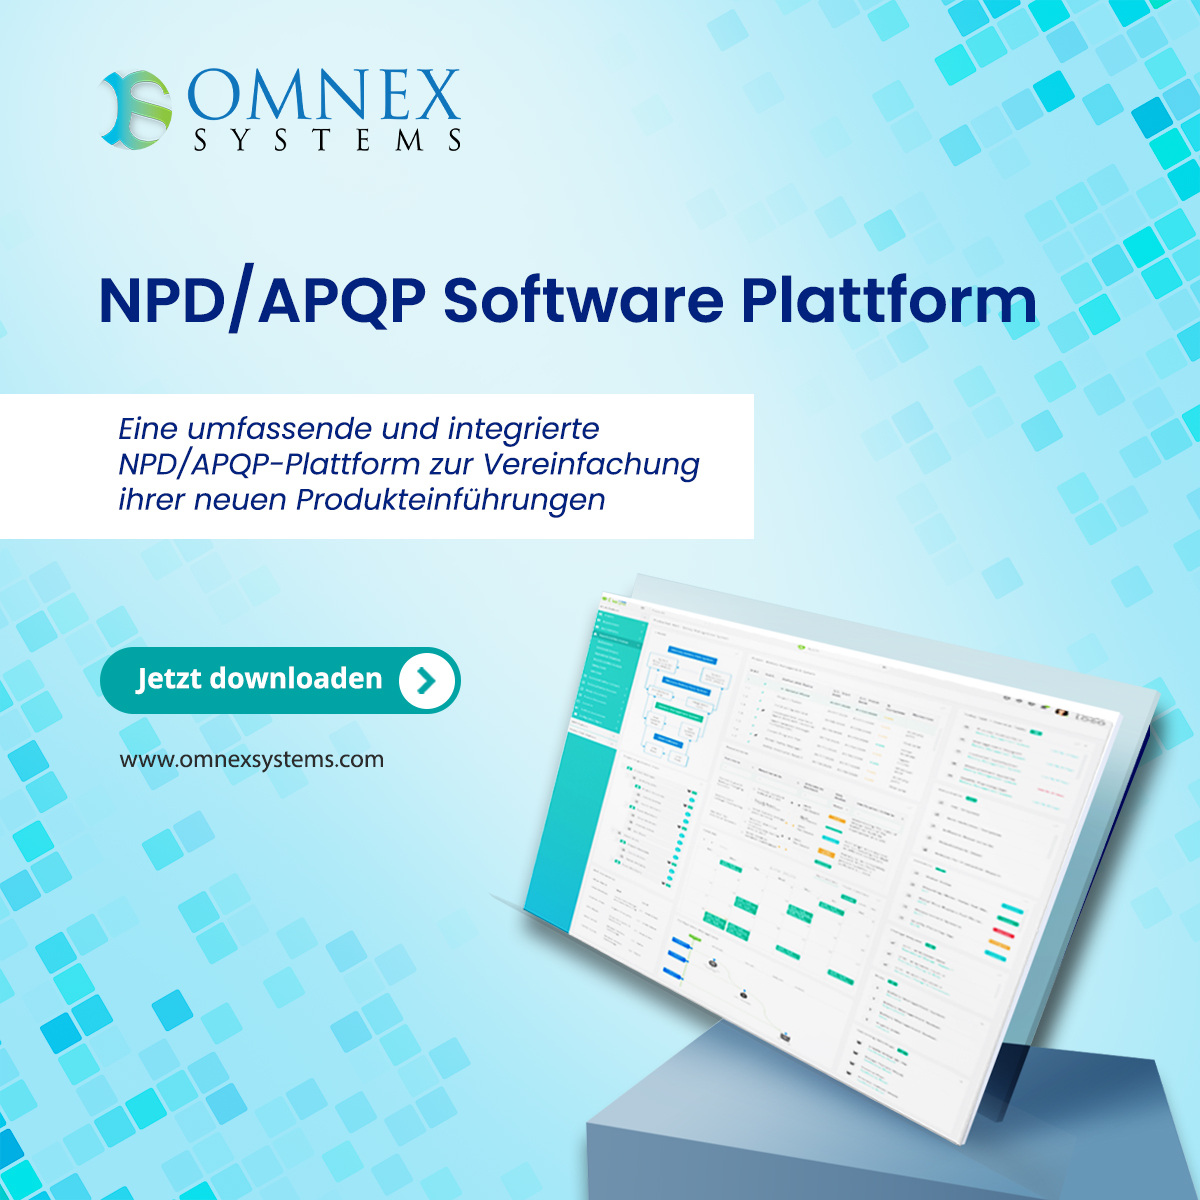 Simplify your new product launches with our NPD/APQP Software Platform! 
𝐂𝐥𝐢𝐜𝐤 𝐓𝐡𝐞 𝐋𝐢𝐧𝐤 𝐁𝐞𝐥𝐨𝐰 𝐓𝐨 𝐊𝐧𝐨𝐰 𝐌𝐨𝐫𝐞:
hubs.li/Q02v1dp60

#NPDsoftware #APQPsoftware #ProductDevelopment #QualityPlanning #InnovationTools #QualityManagement #ProductLifecycle